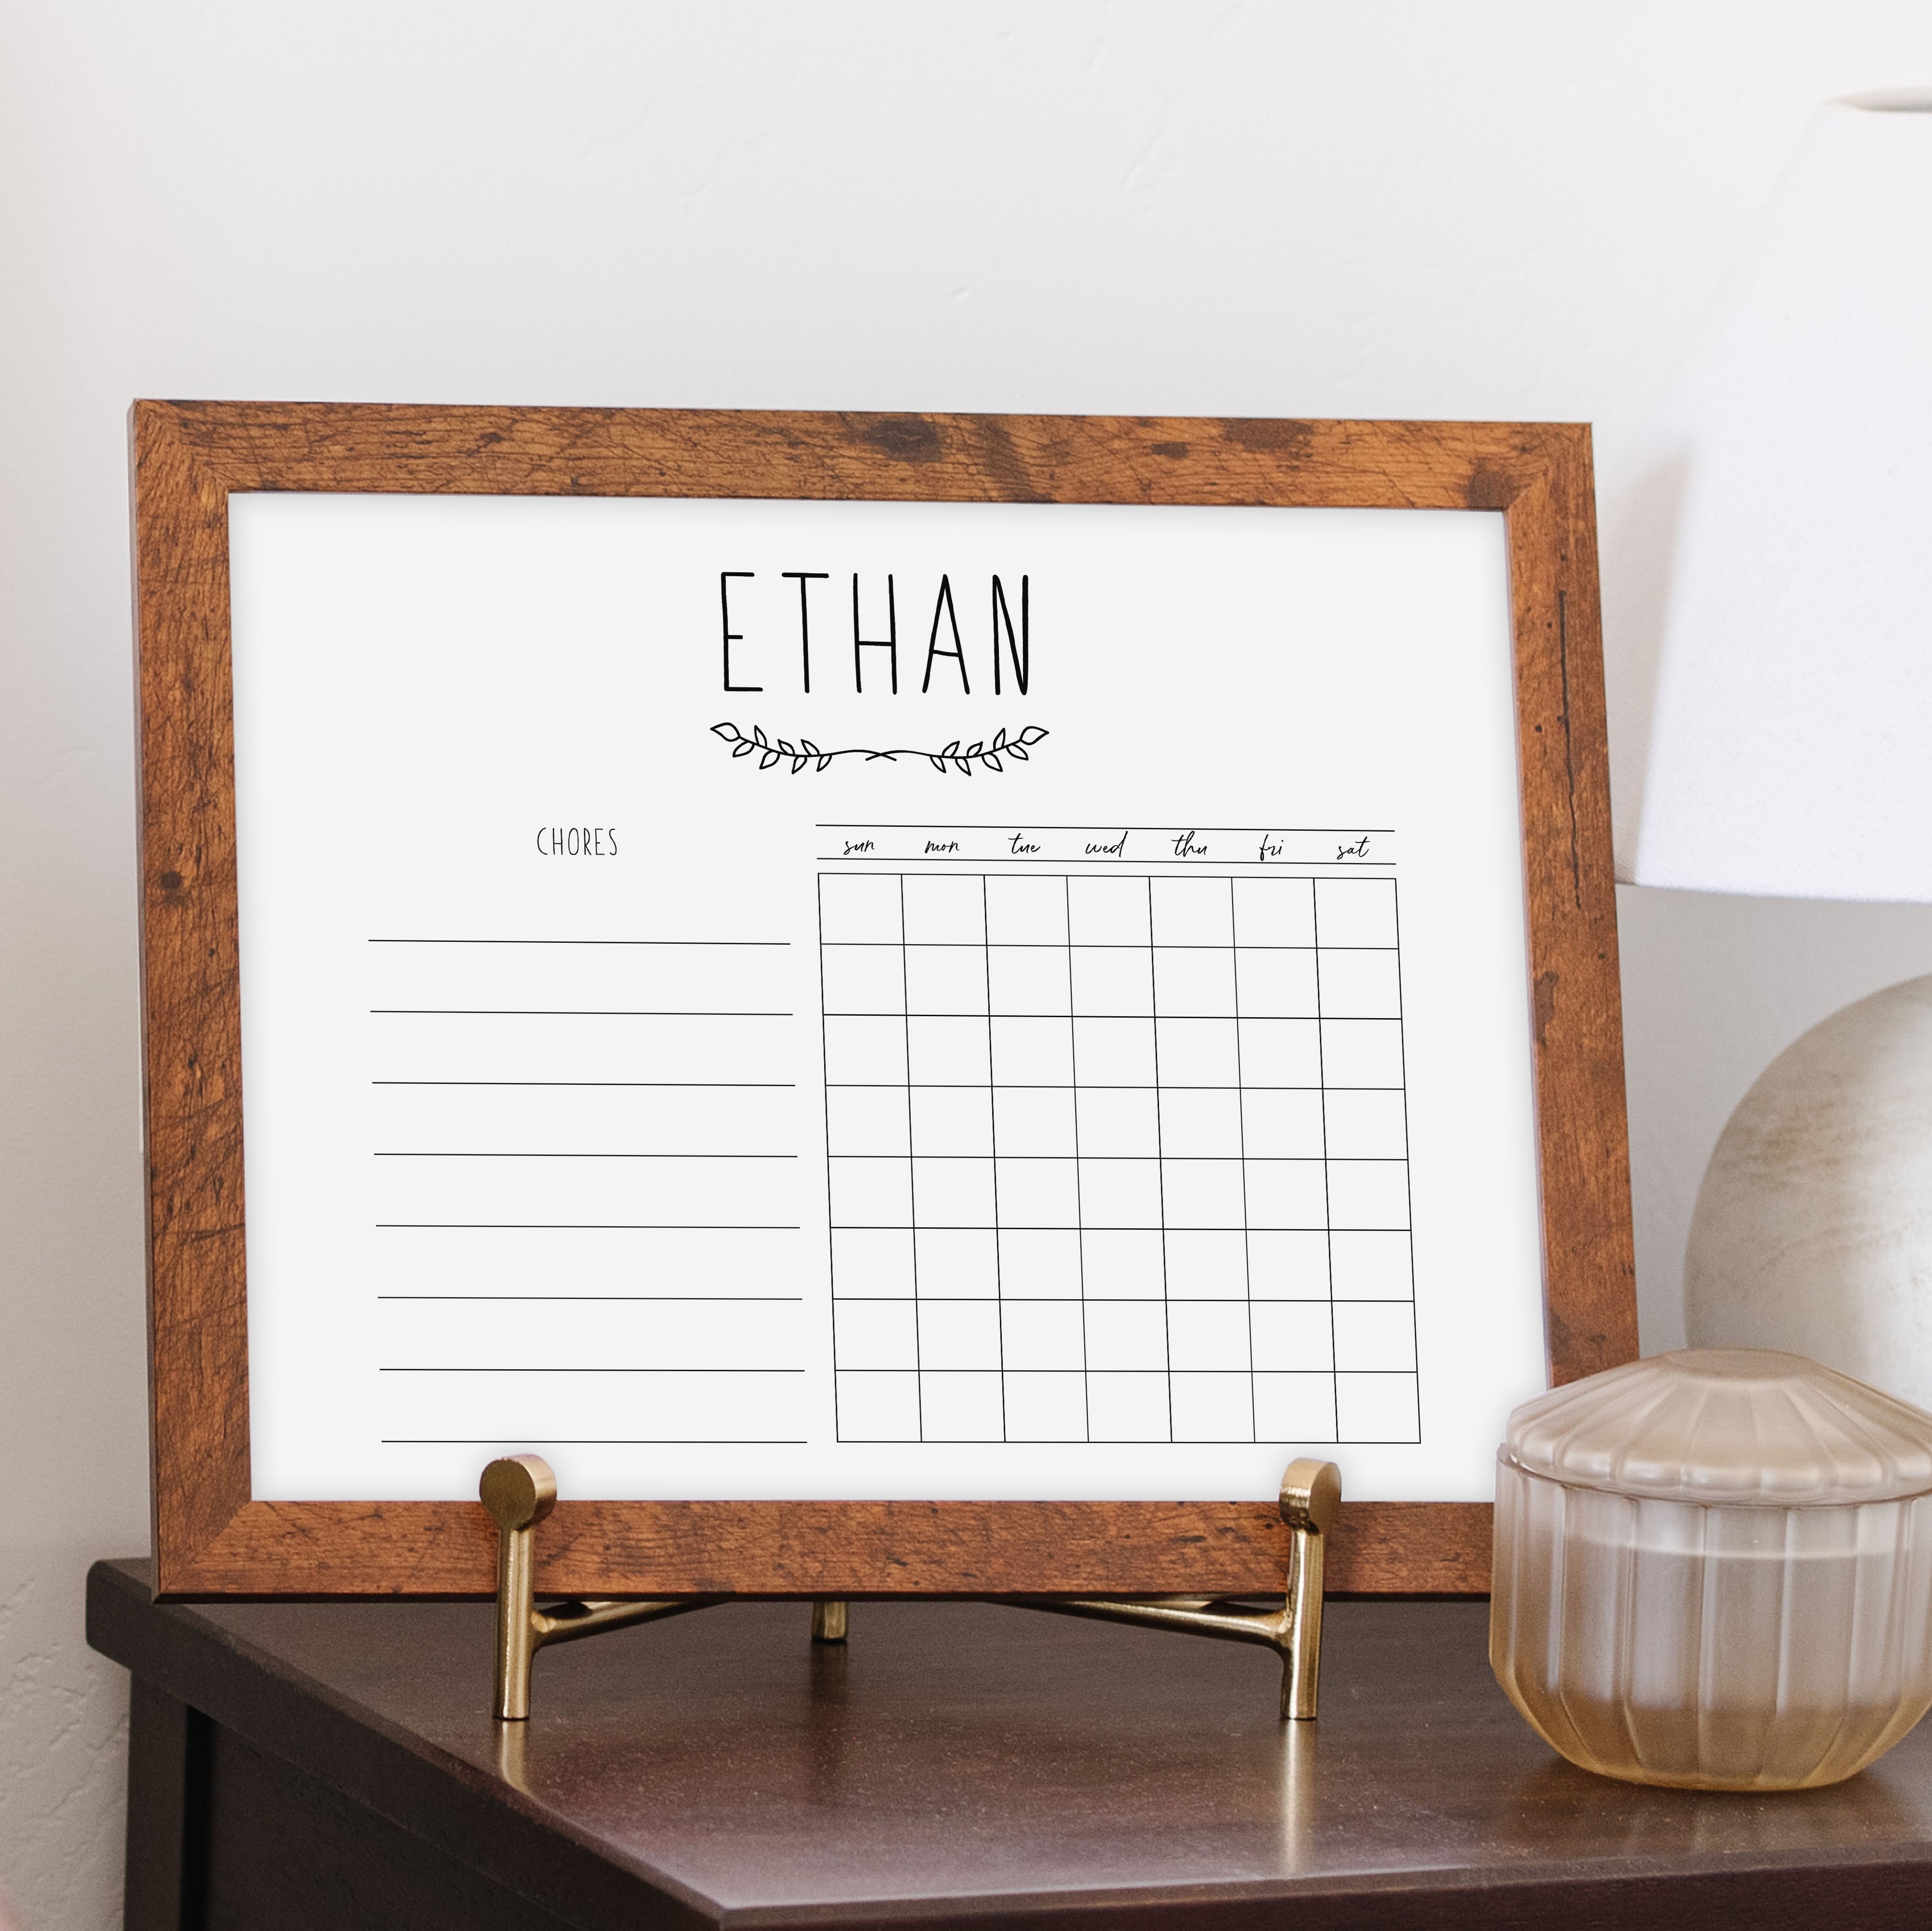 1 Person Framed Whiteboard Chore Chart | Horizontal Lucy